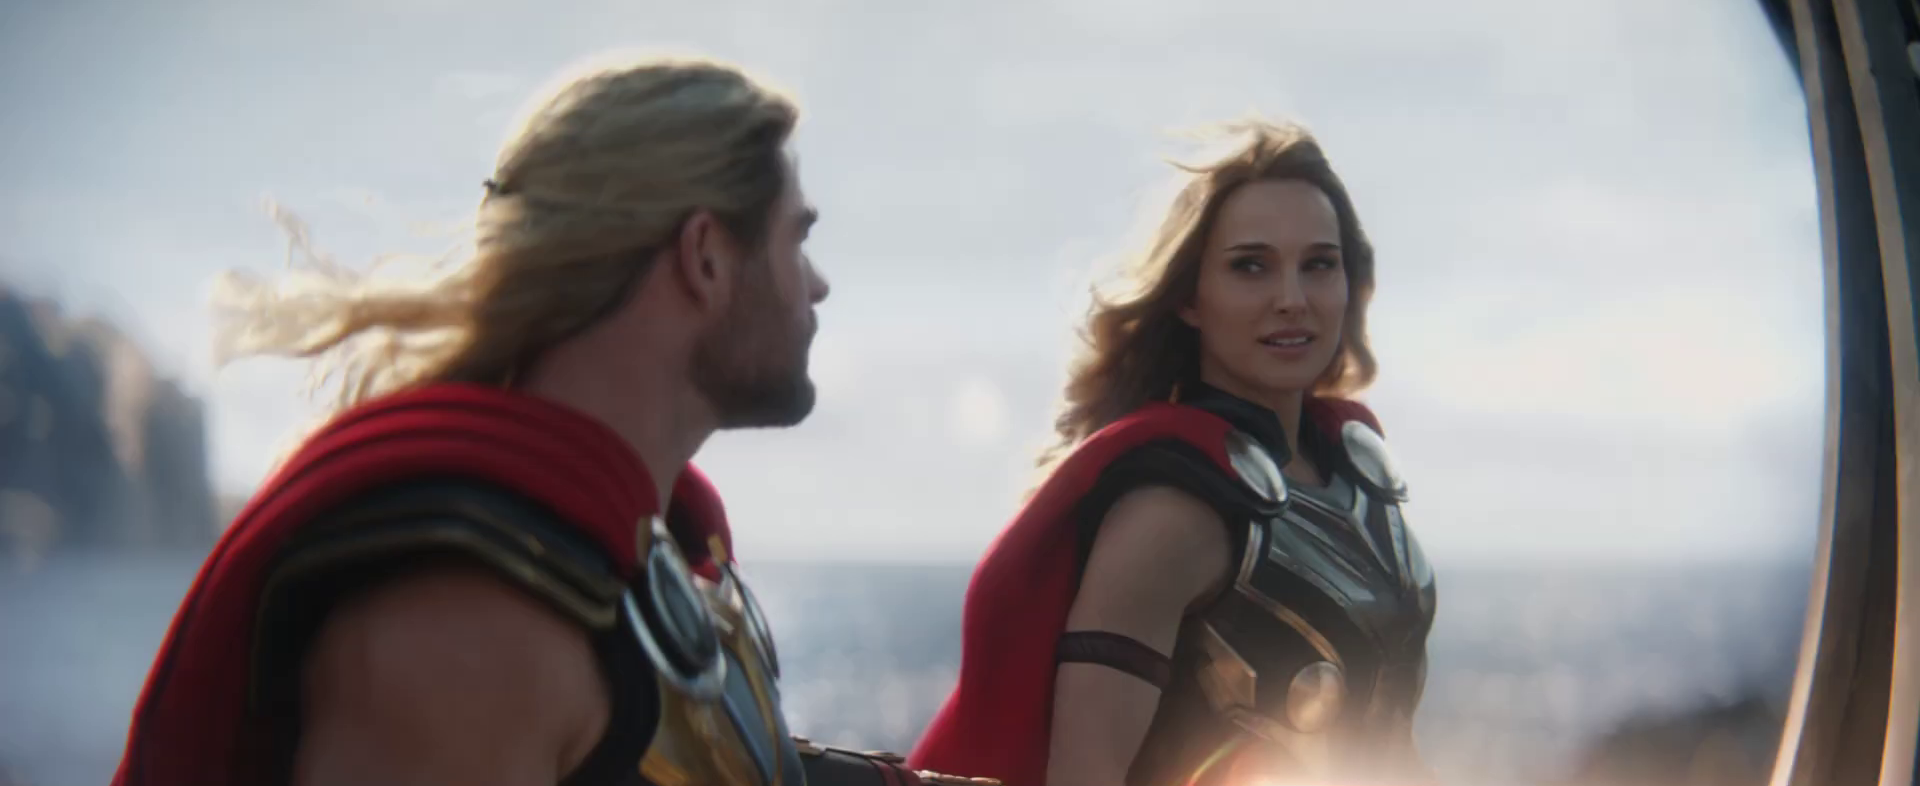 Thor: Love and Thunder Is an MCU Hit. Where Does Summer Box Office Go?